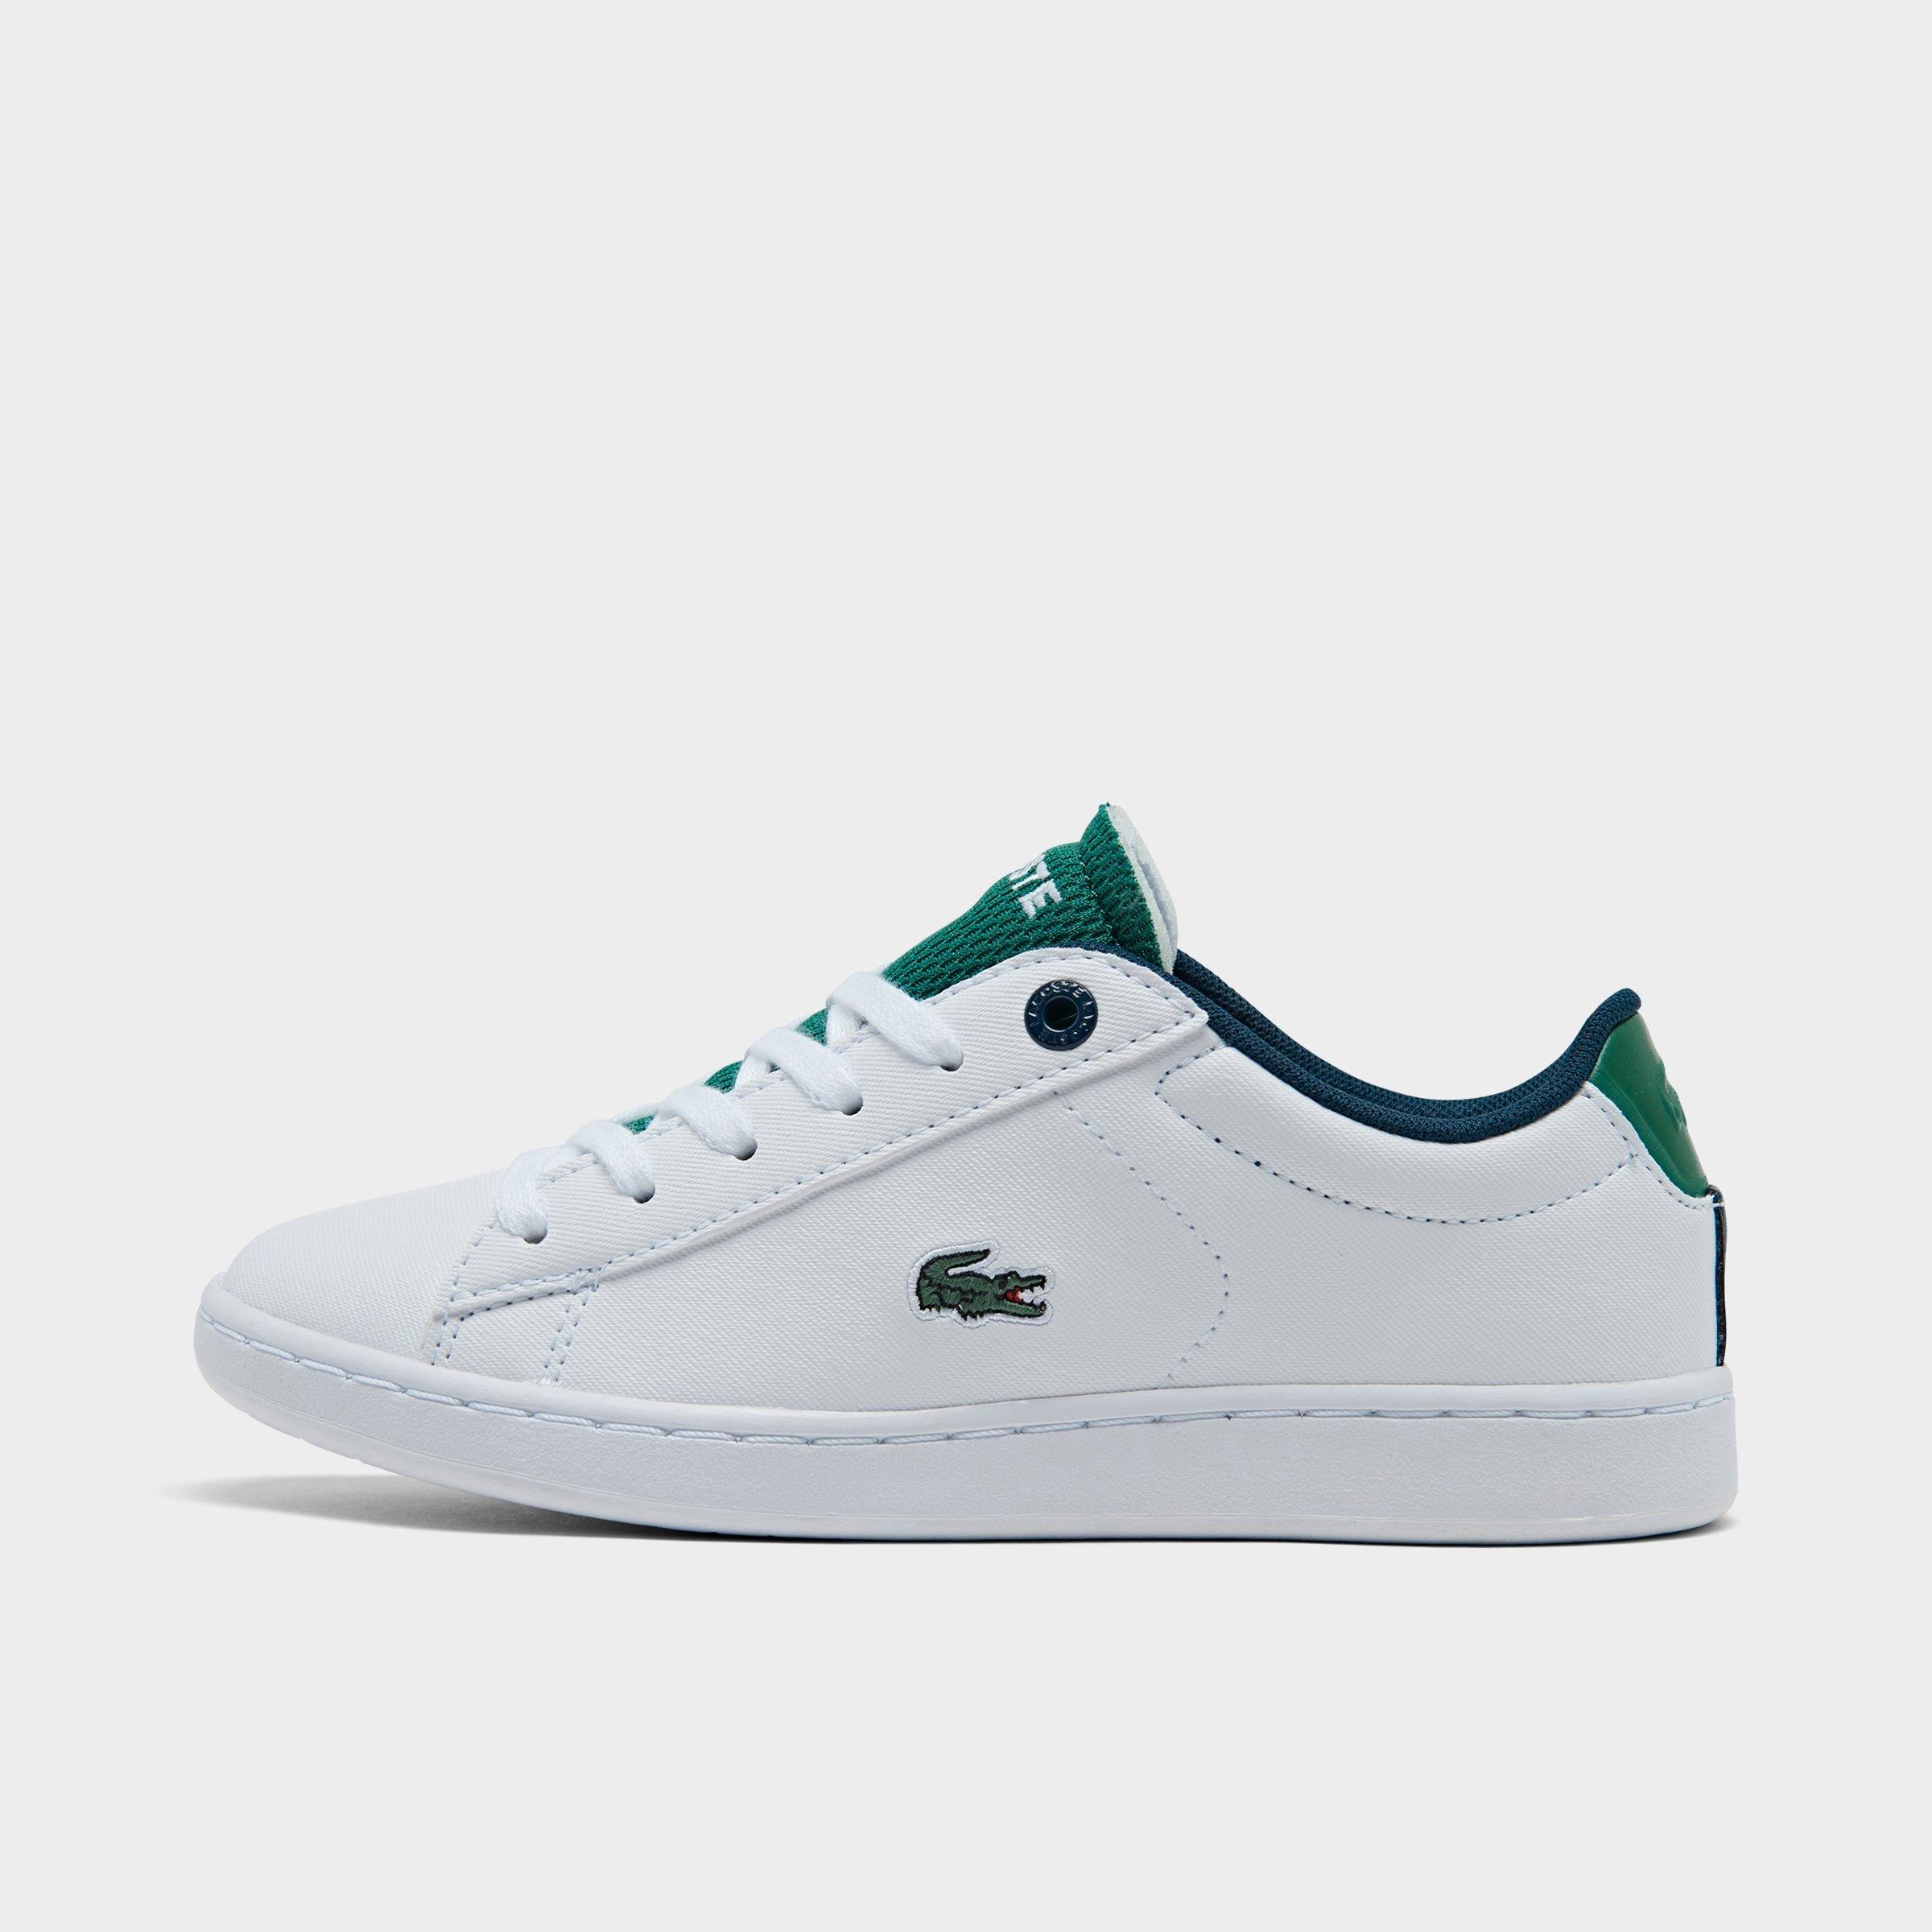 lacoste shoes price for kids